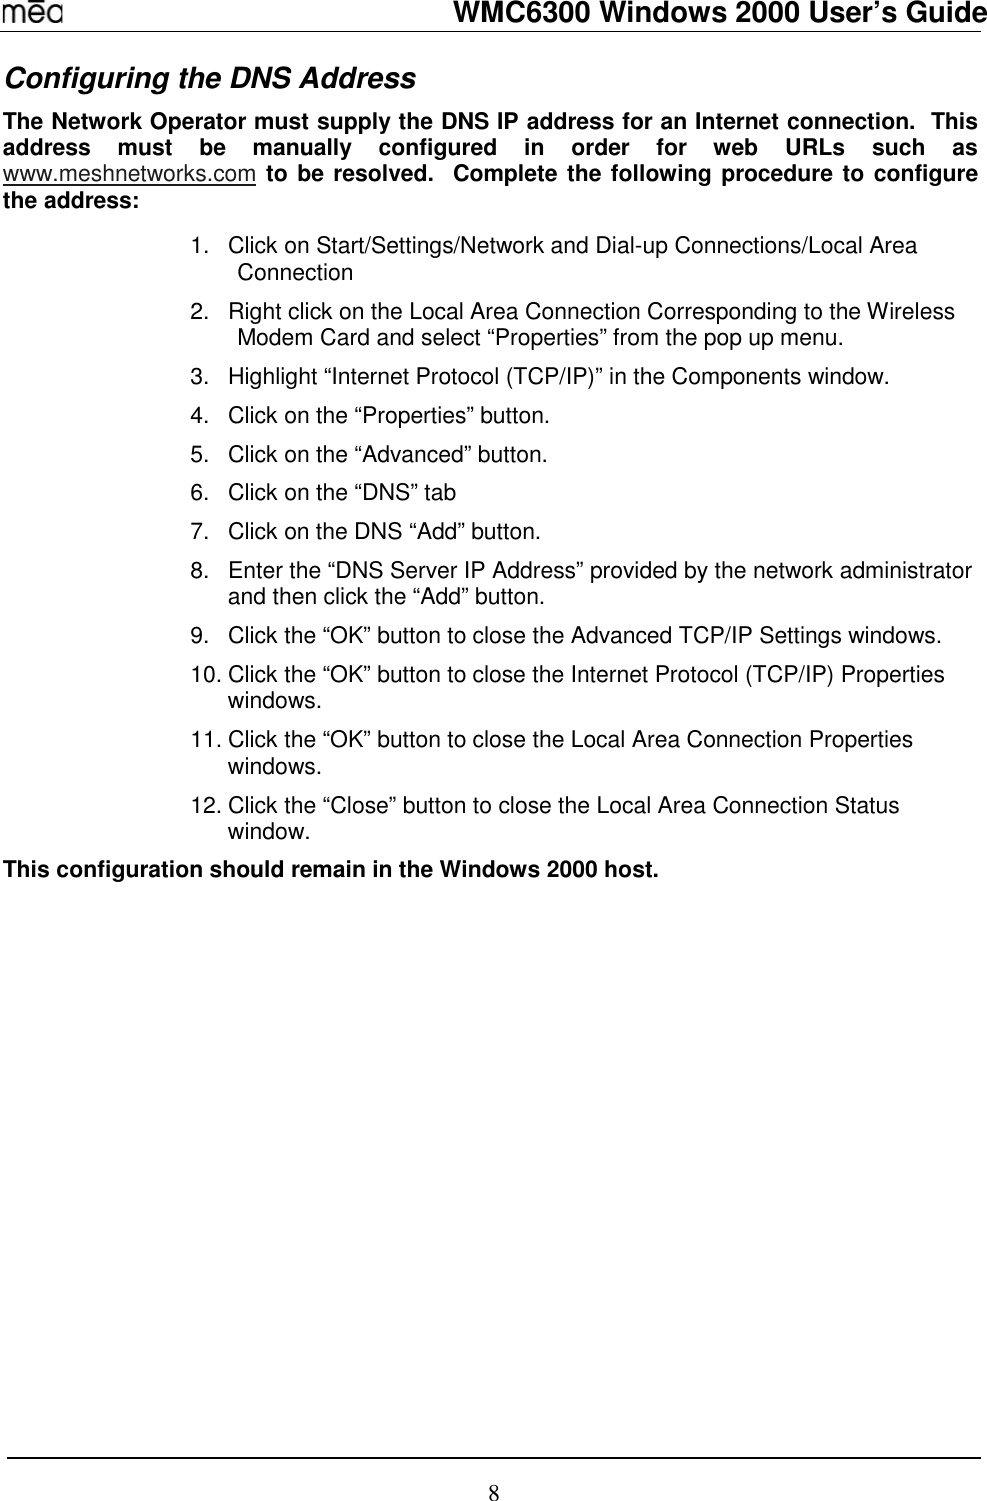   WMC6300 Windows 2000 User’s Guide 8 Configuring the DNS Address The Network Operator must supply the DNS IP address for an Internet connection.  This address must be manually configured in order for web URLs such as www.meshnetworks.com to be resolved.  Complete the following procedure to configure the address:   1.  Click on Start/Settings/Network and Dial-up Connections/Local Area Connection 2.  Right click on the Local Area Connection Corresponding to the Wireless Modem Card and select “Properties” from the pop up menu. 3.  Highlight “Internet Protocol (TCP/IP)” in the Components window. 4.  Click on the “Properties” button. 5.  Click on the “Advanced” button. 6.  Click on the “DNS” tab 7.  Click on the DNS “Add” button. 8.  Enter the “DNS Server IP Address” provided by the network administrator and then click the “Add” button. 9.  Click the “OK” button to close the Advanced TCP/IP Settings windows. 10. Click the “OK” button to close the Internet Protocol (TCP/IP) Properties windows. 11. Click the “OK” button to close the Local Area Connection Properties windows. 12. Click the “Close” button to close the Local Area Connection Status window. This configuration should remain in the Windows 2000 host.  